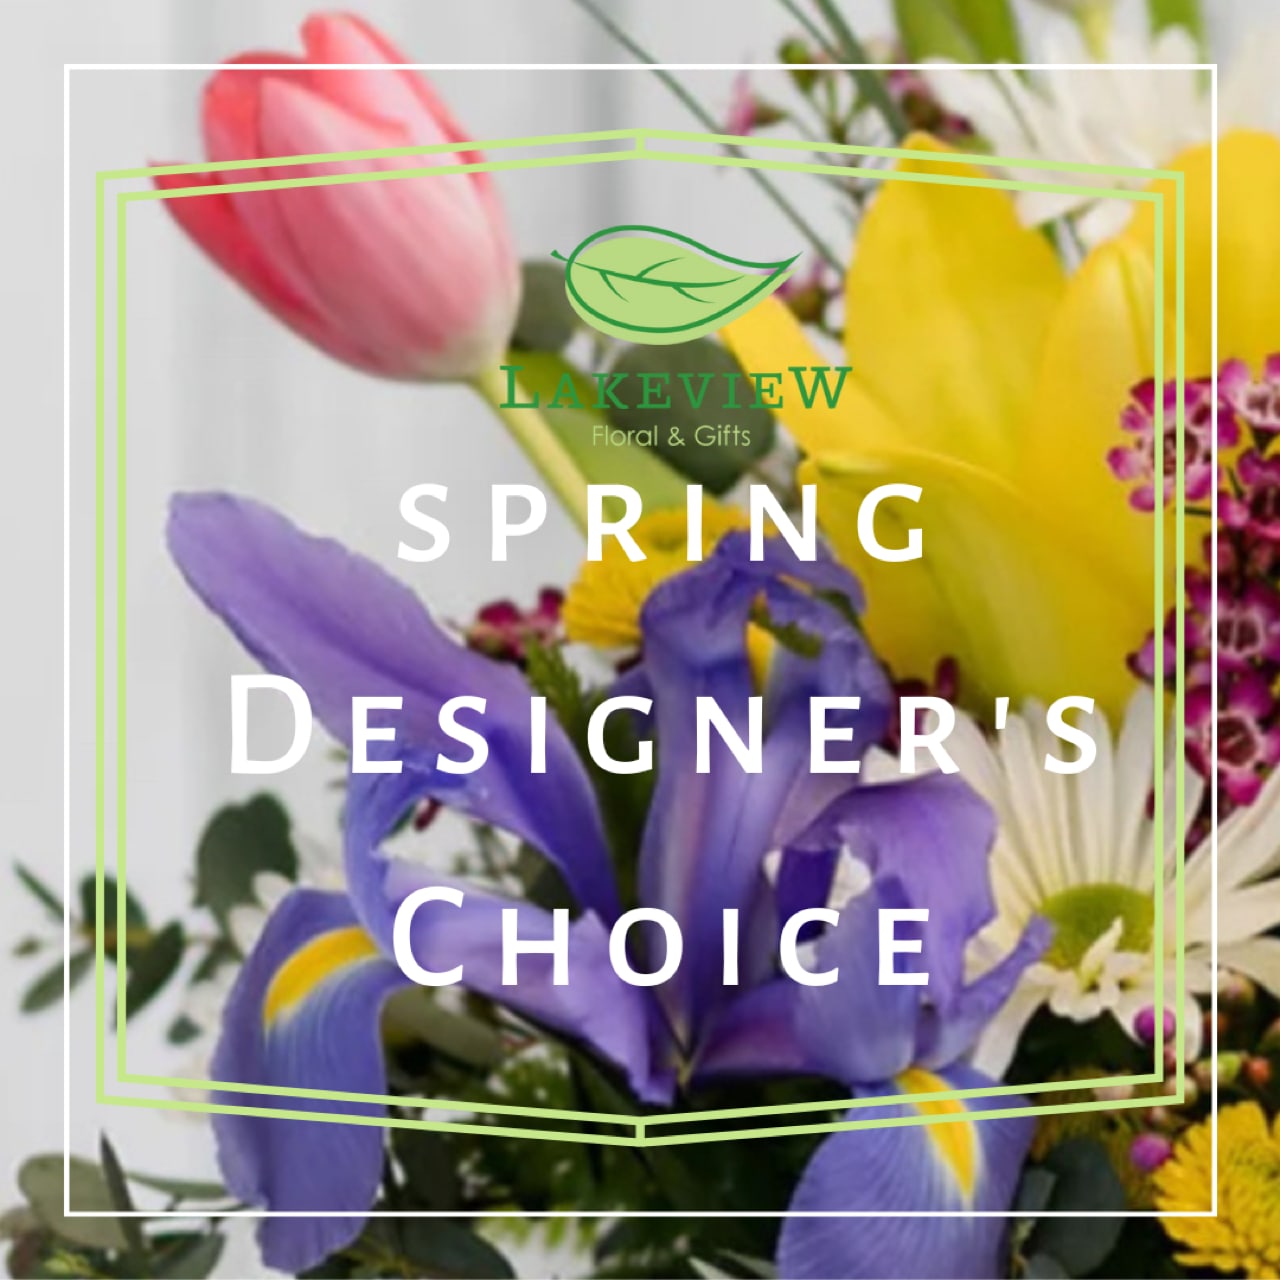 Spring Designer's Choice - Let our designers create a one of a kind design with the freshest spring blooms for you! We will select the freshest, highest quality blooms available to make your gift extra special!